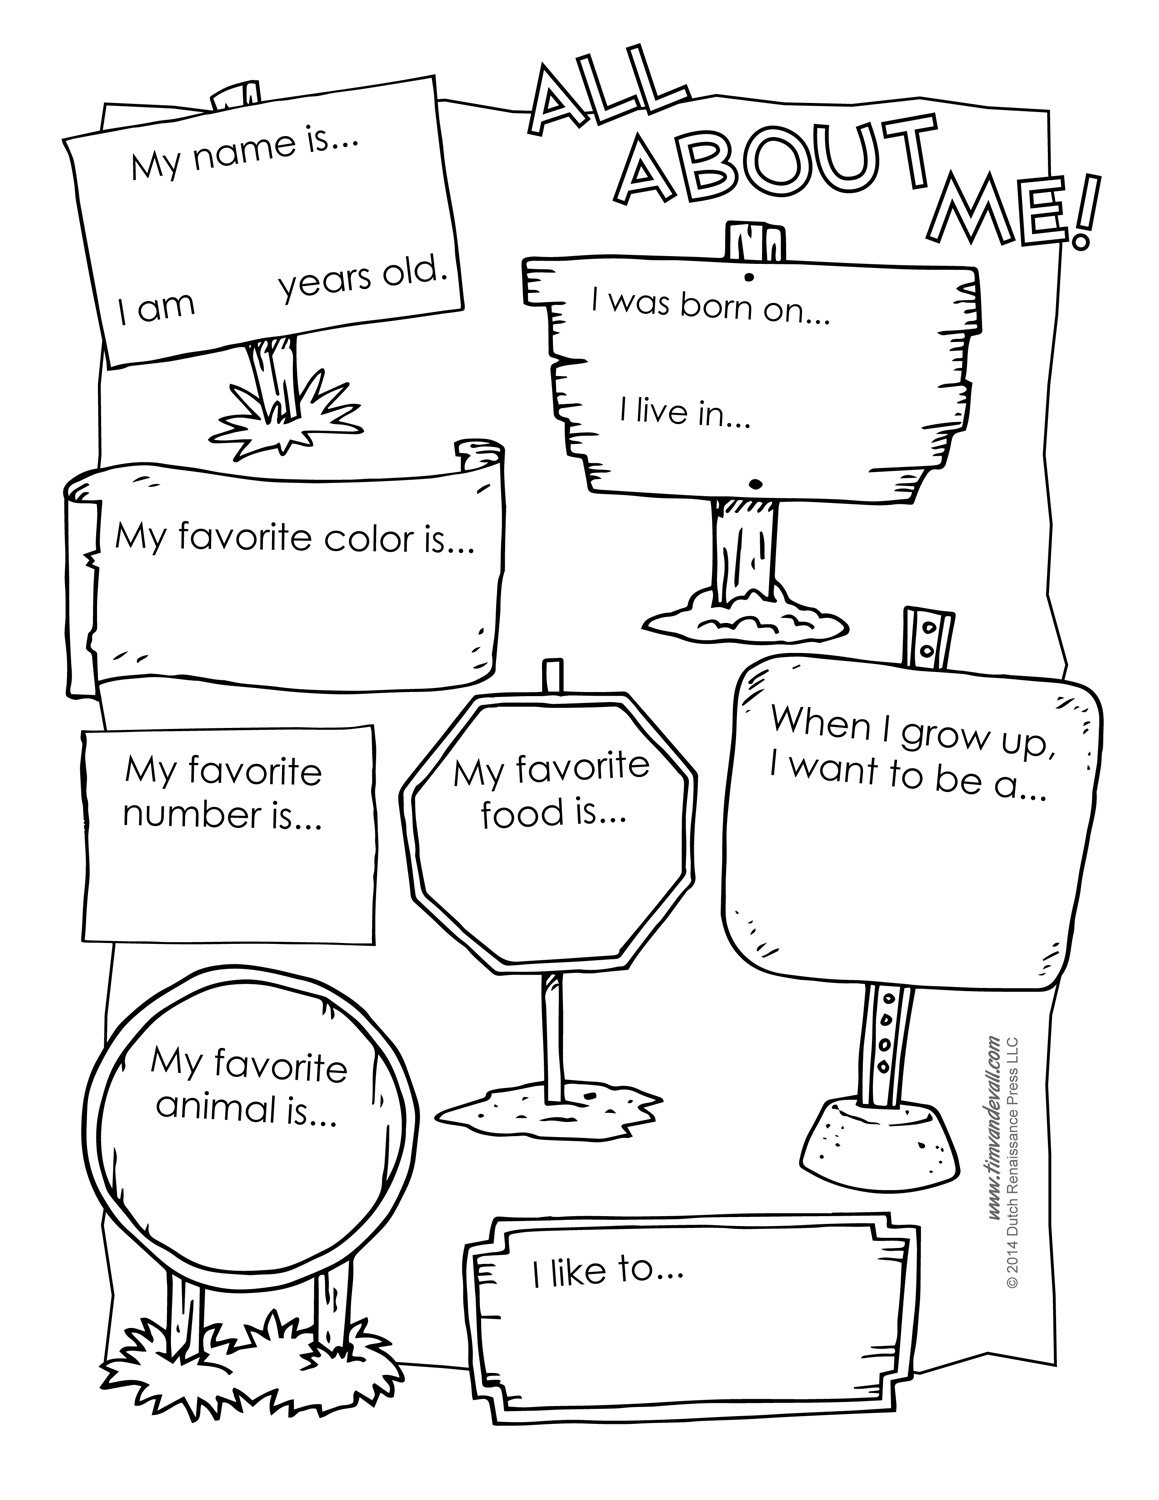 Printable All About Me Poster &amp;amp; All About Me Template Pdf - Free Printable All About Me Poster